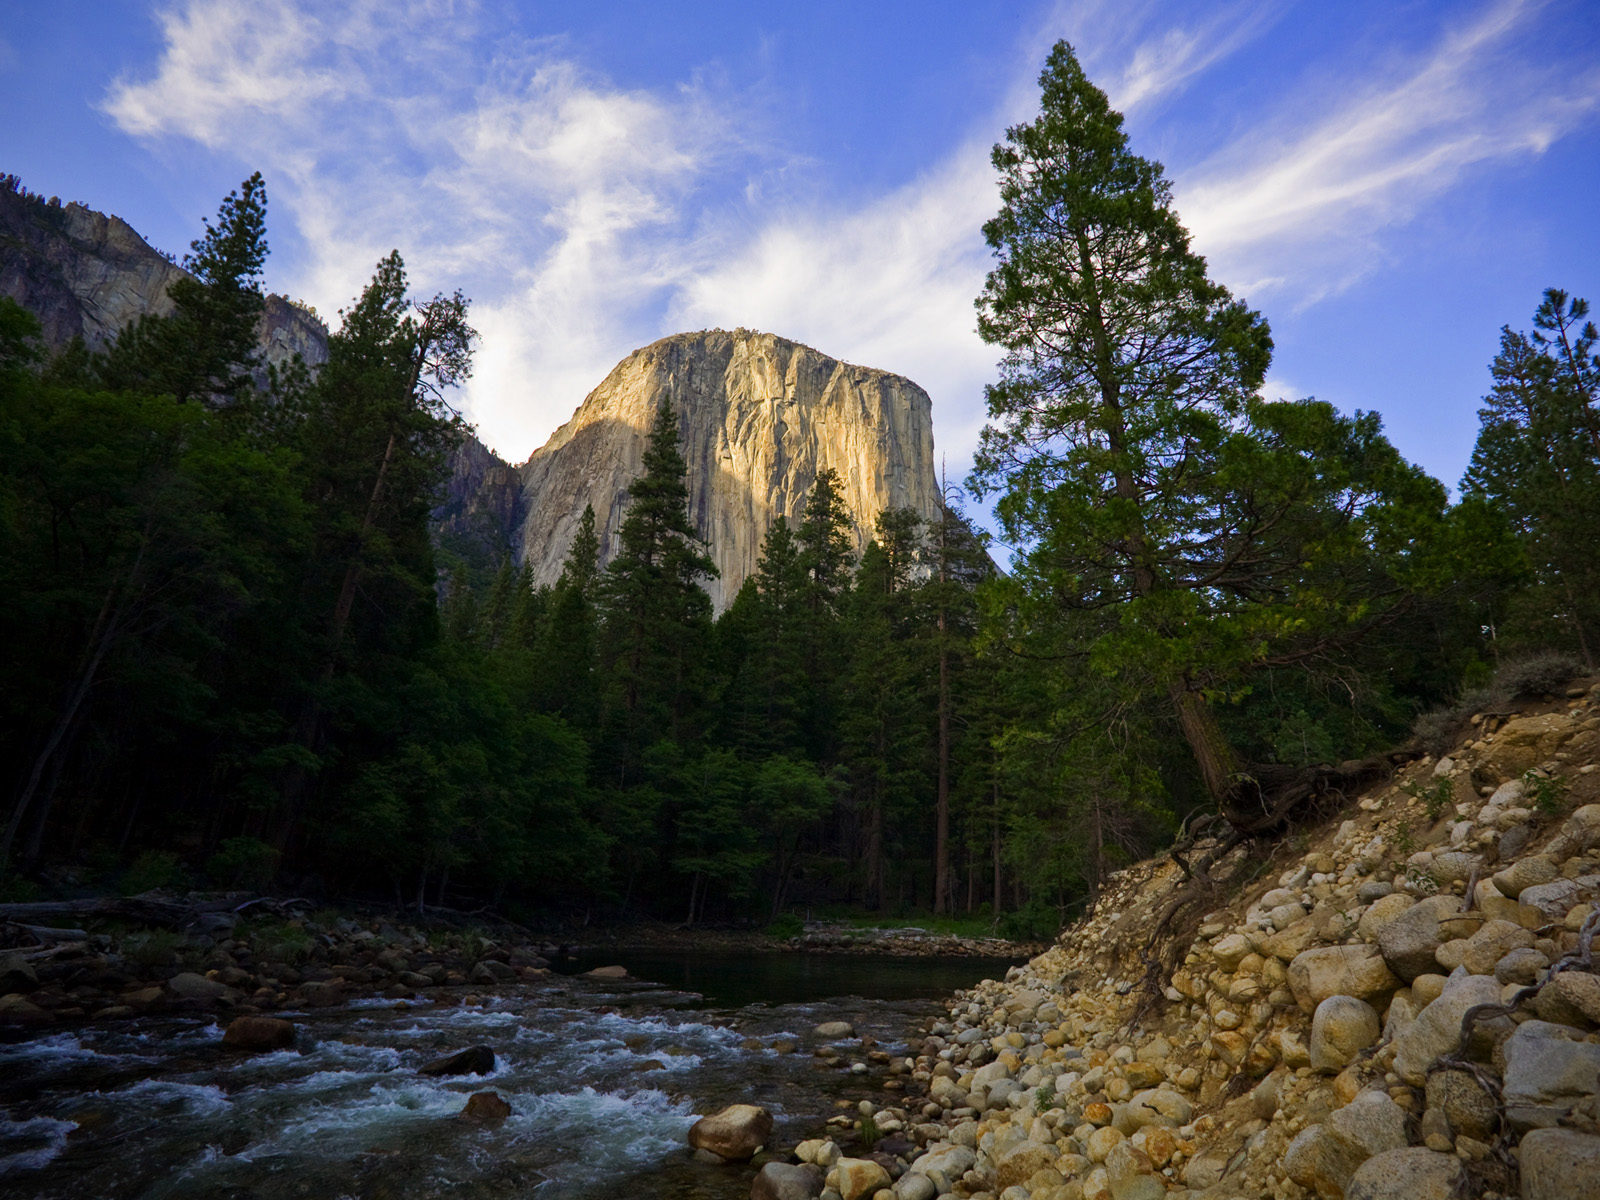 El Capitan Best Background Full HD1920x1080p, 1280x720p, – HD Wallpapers Backgrounds Desktop, iphone & Android Free Download